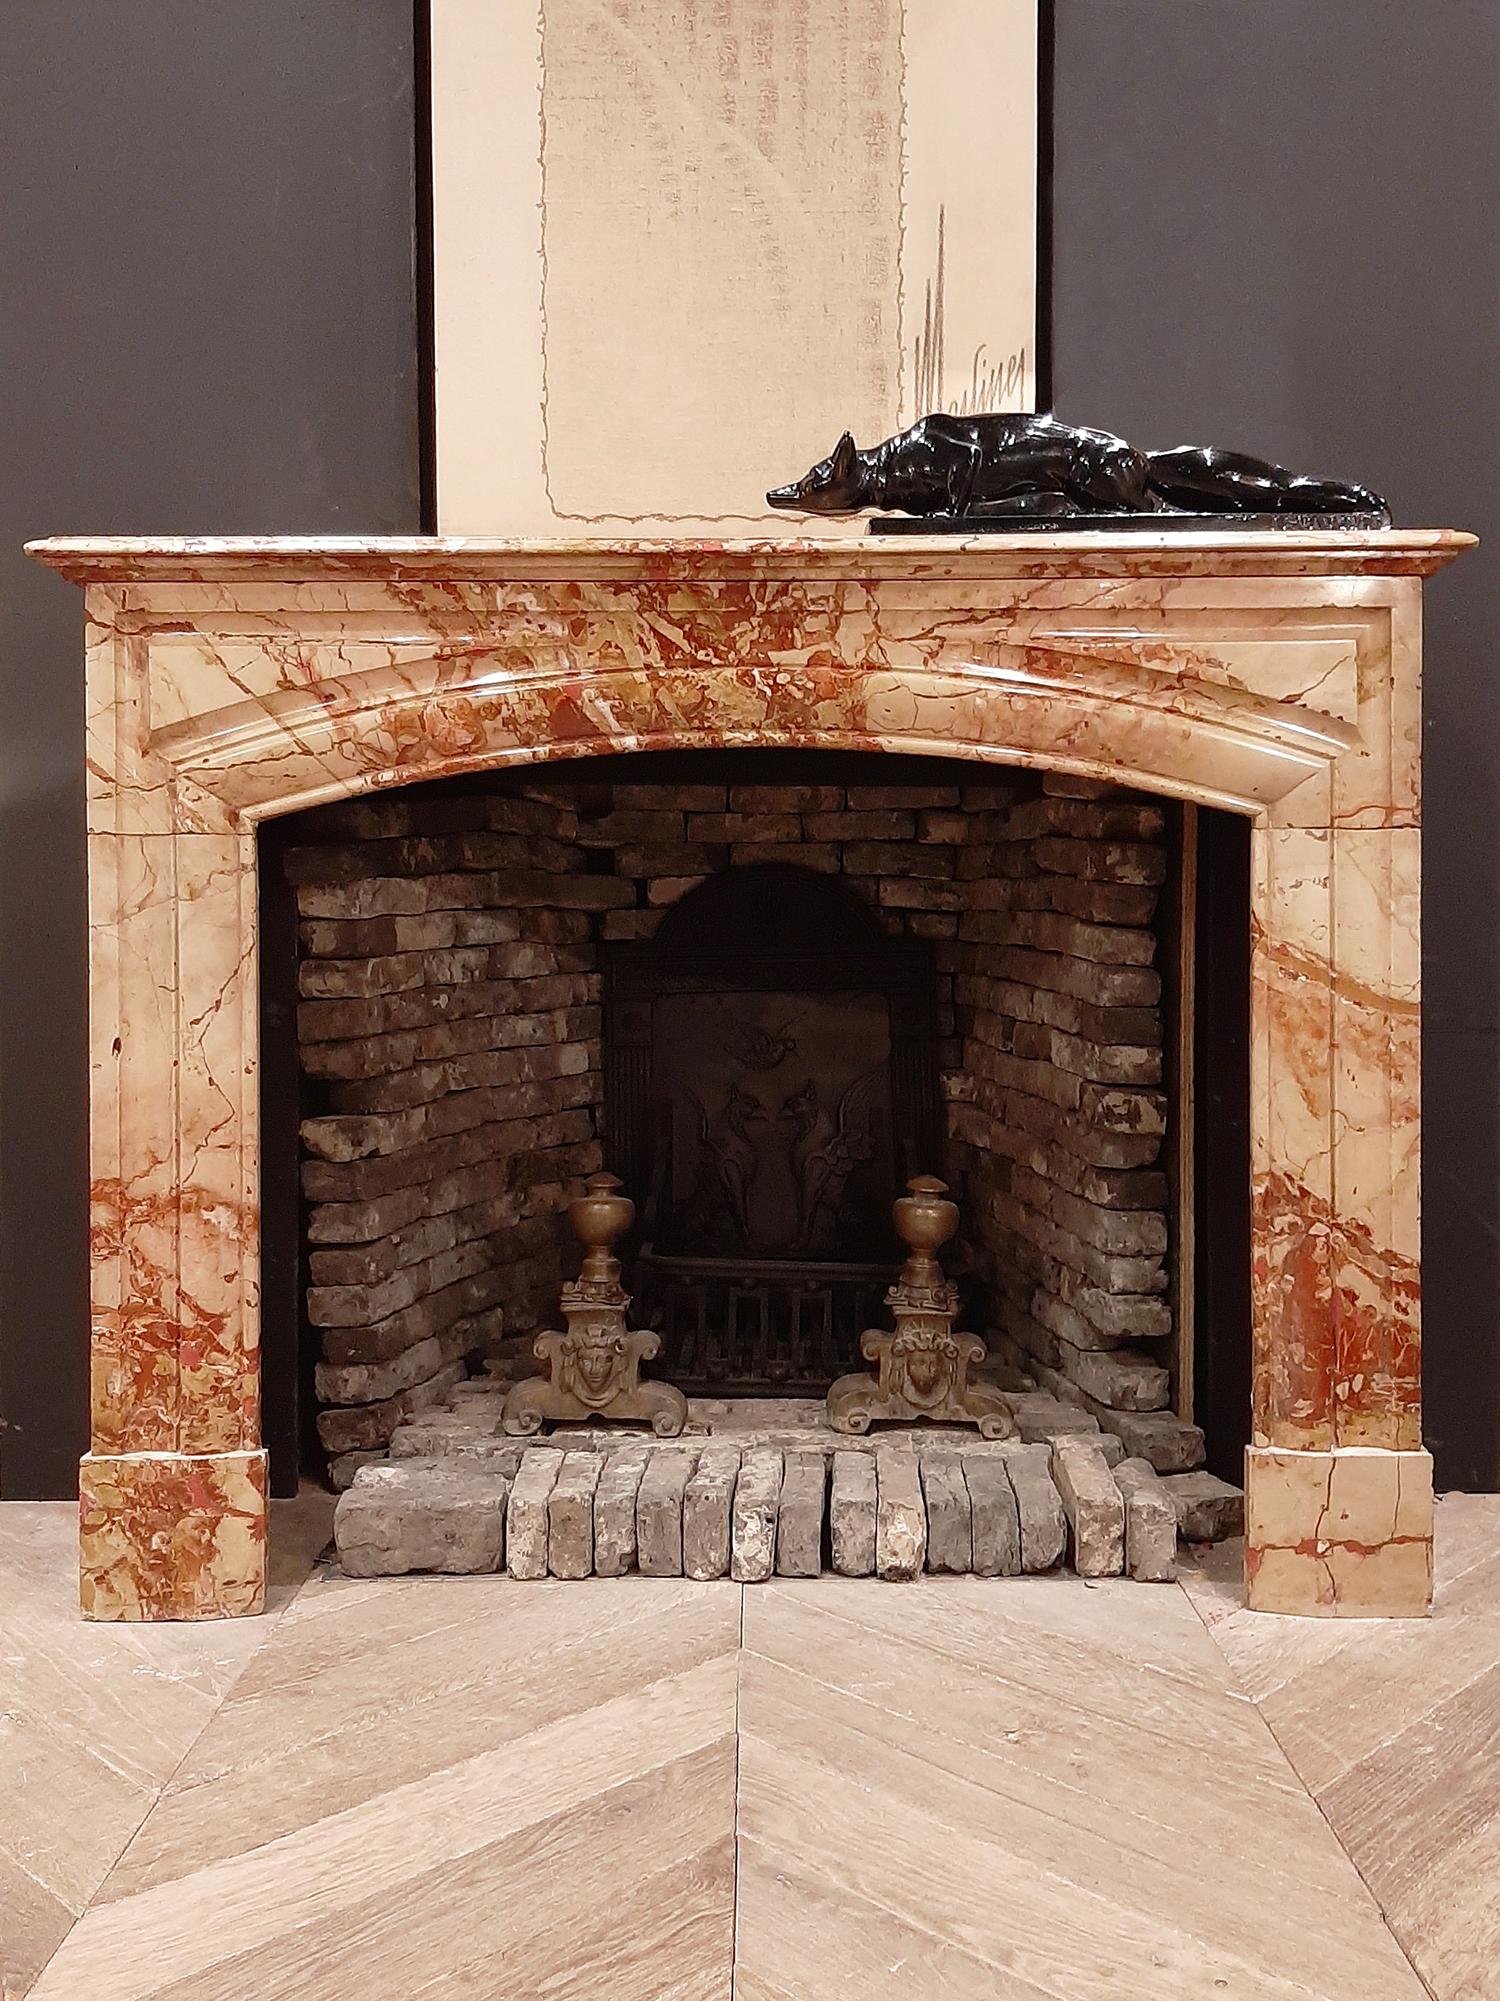 Antique French 19th century Boudin Mantlepiece. An elegant cheminée chambre with clean lines and an arched firemouth. This fireplace is made of Sarrancolin marble, a very special marble with shades of pink, red, orange beige and yellow. Sarrancolin